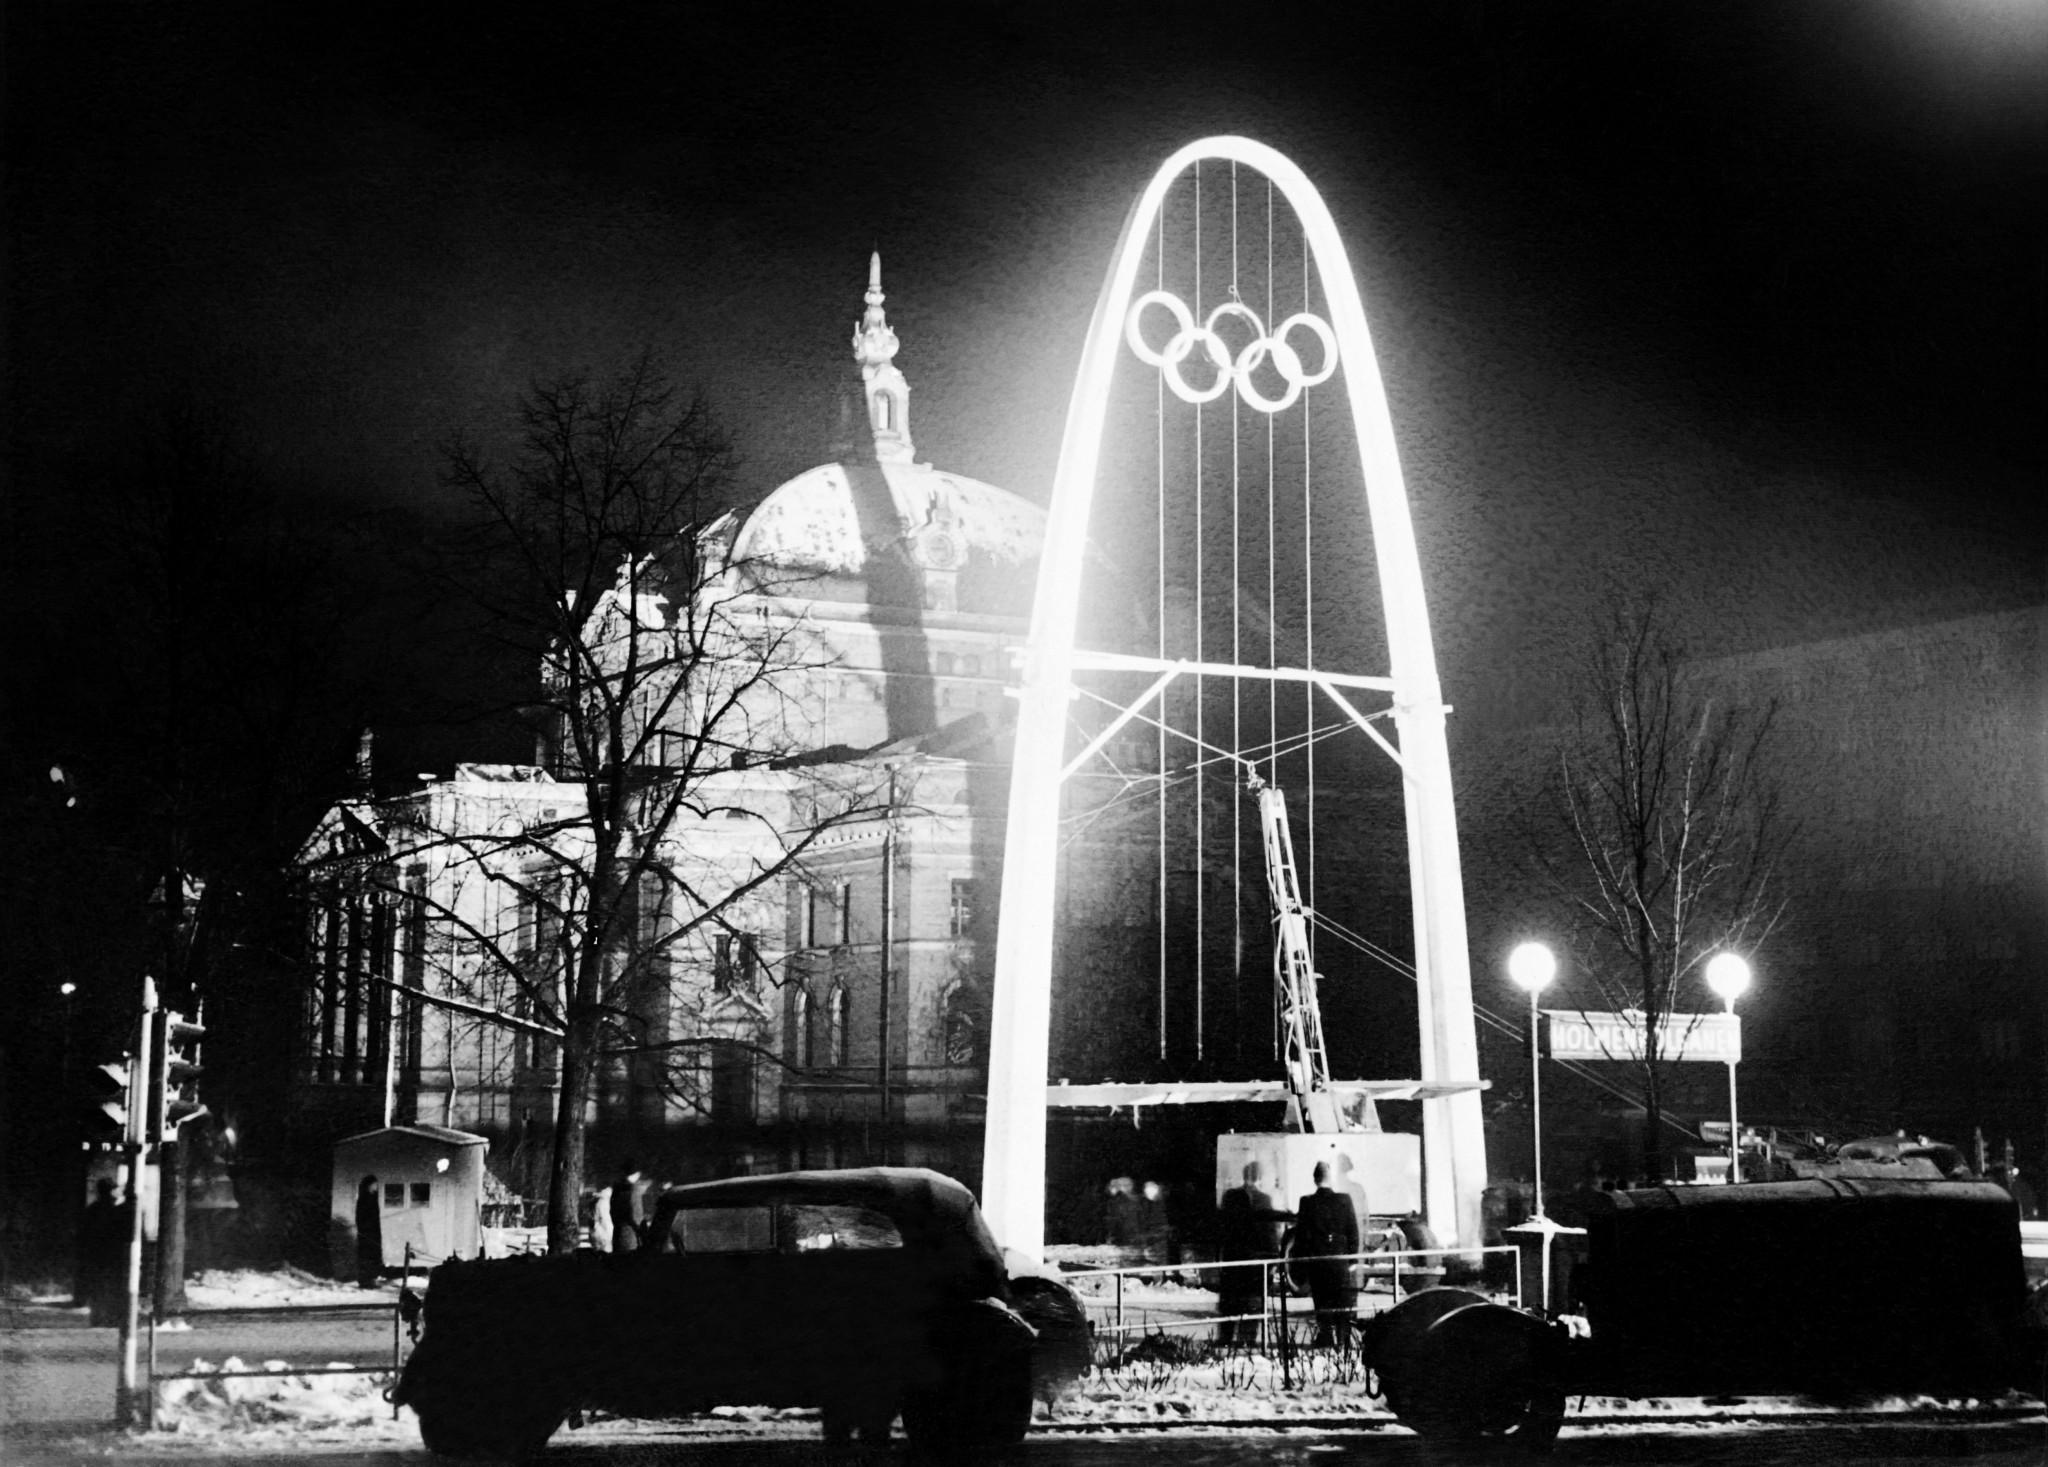 The city of Oslo was decorated with the Olympic Rings during the 1952 Winter Olympics ©Getty Images